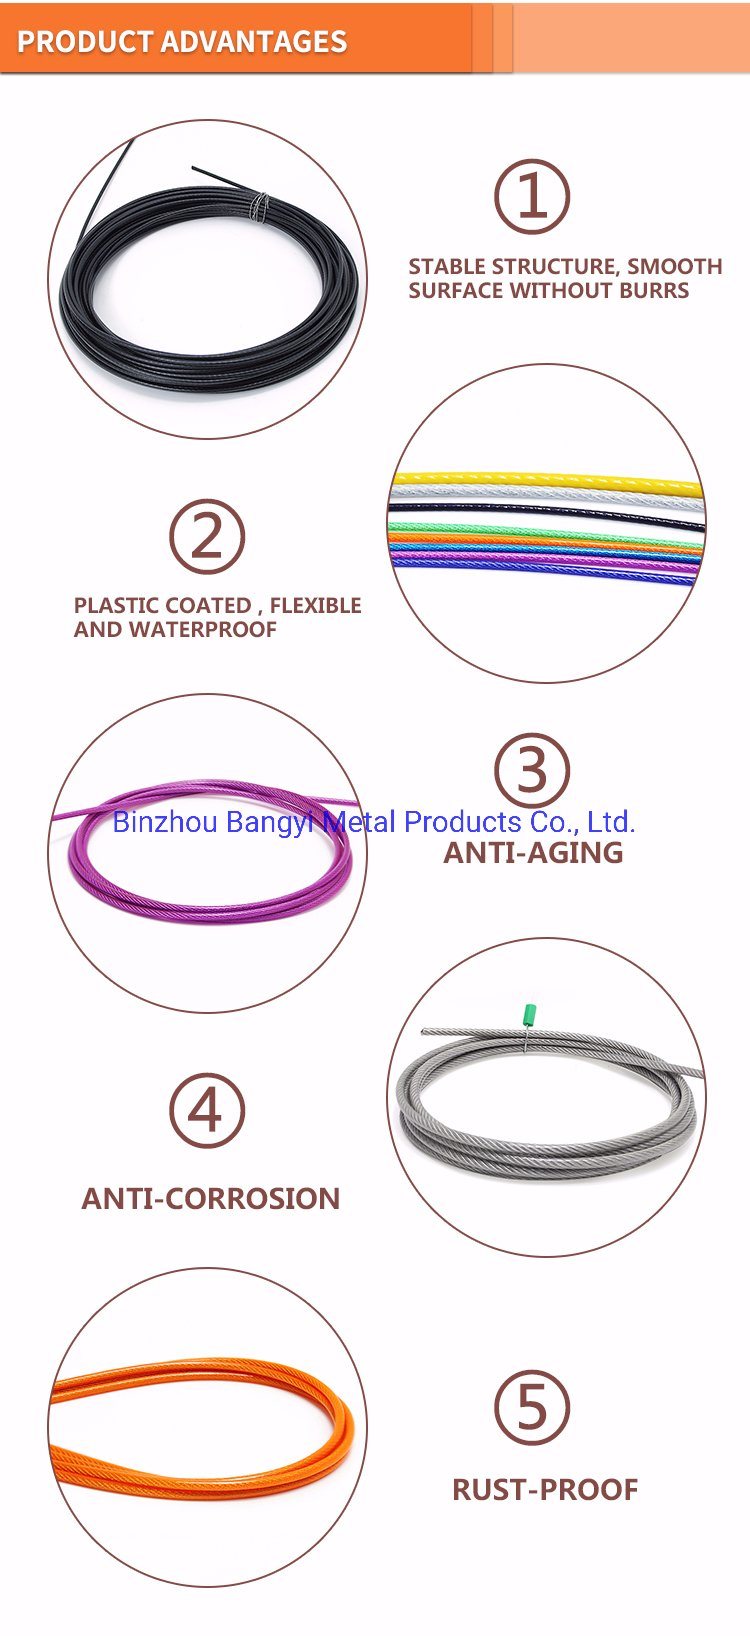 PVC Coated Cable Plastic Steel Wire Rope